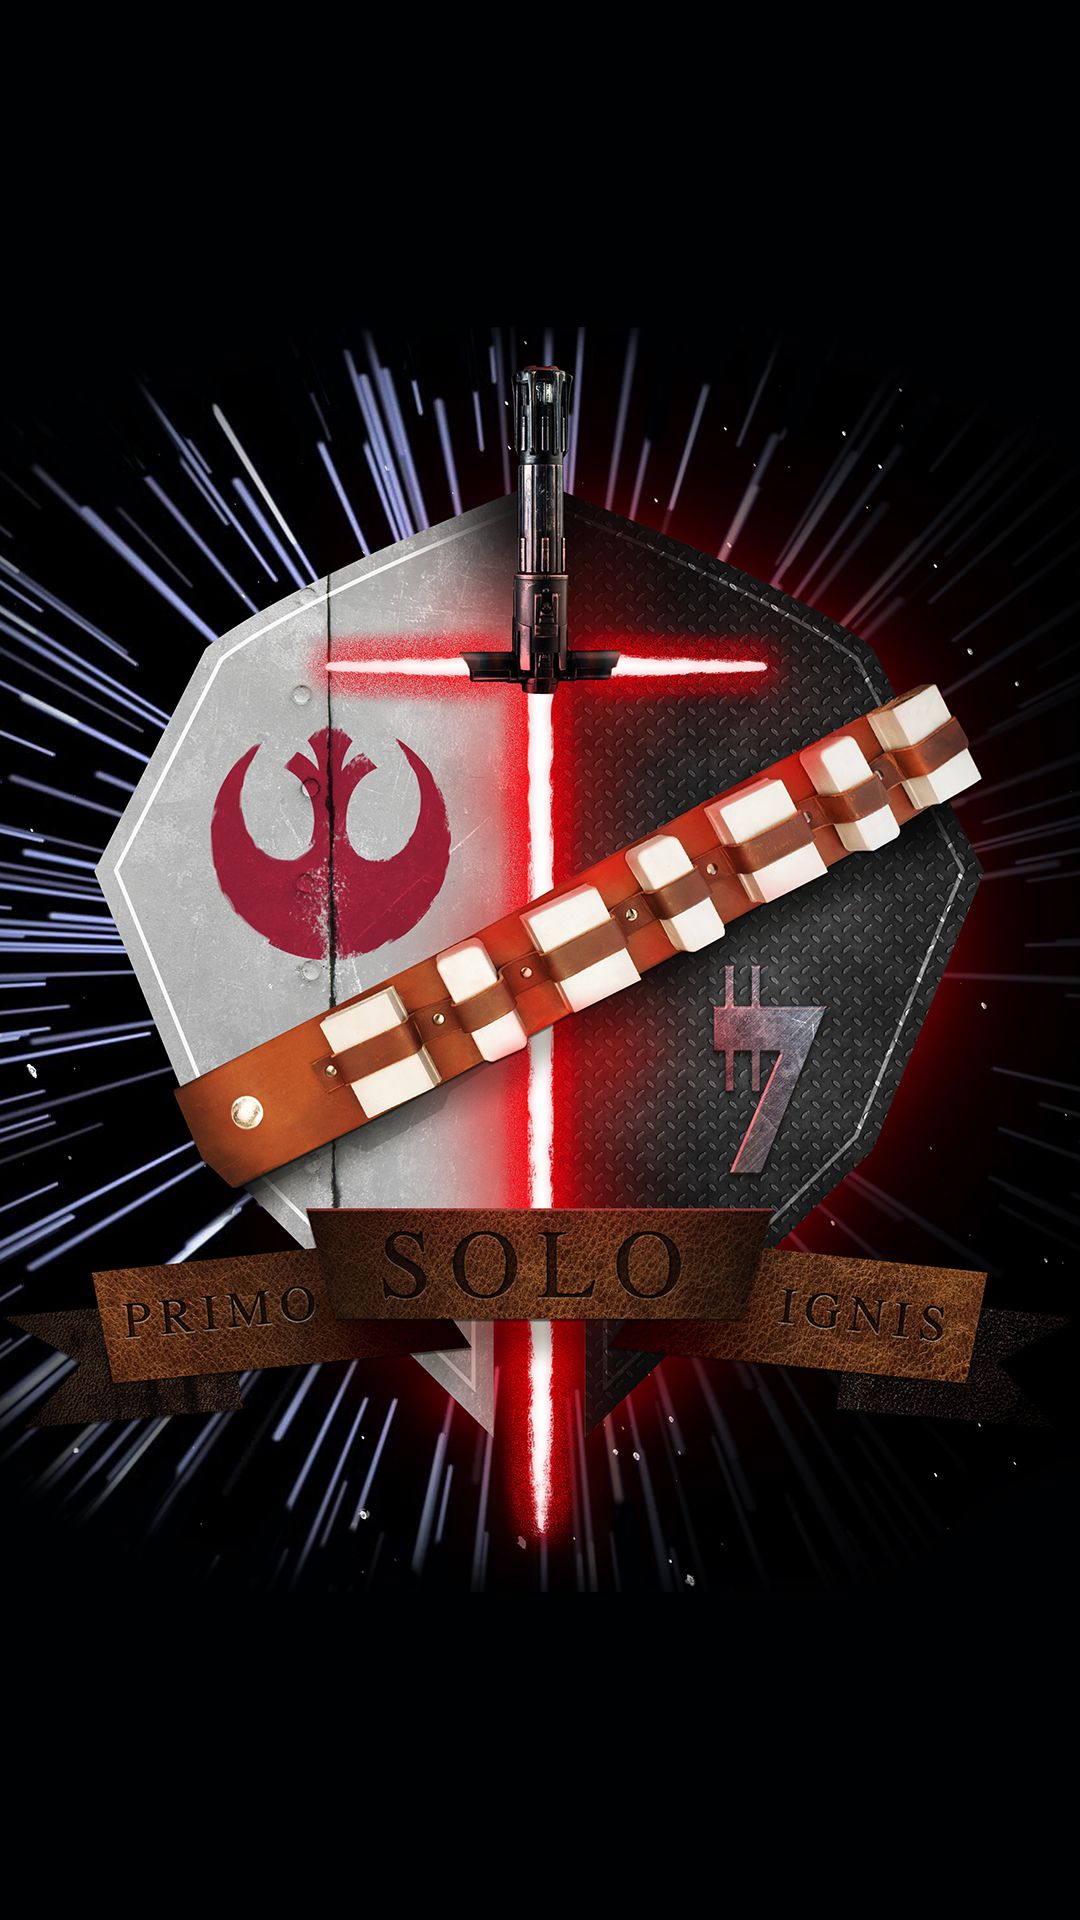 Star Wars Family Crest Han Solo Primo Solo Ignis iPhone HD Wallpaper HD